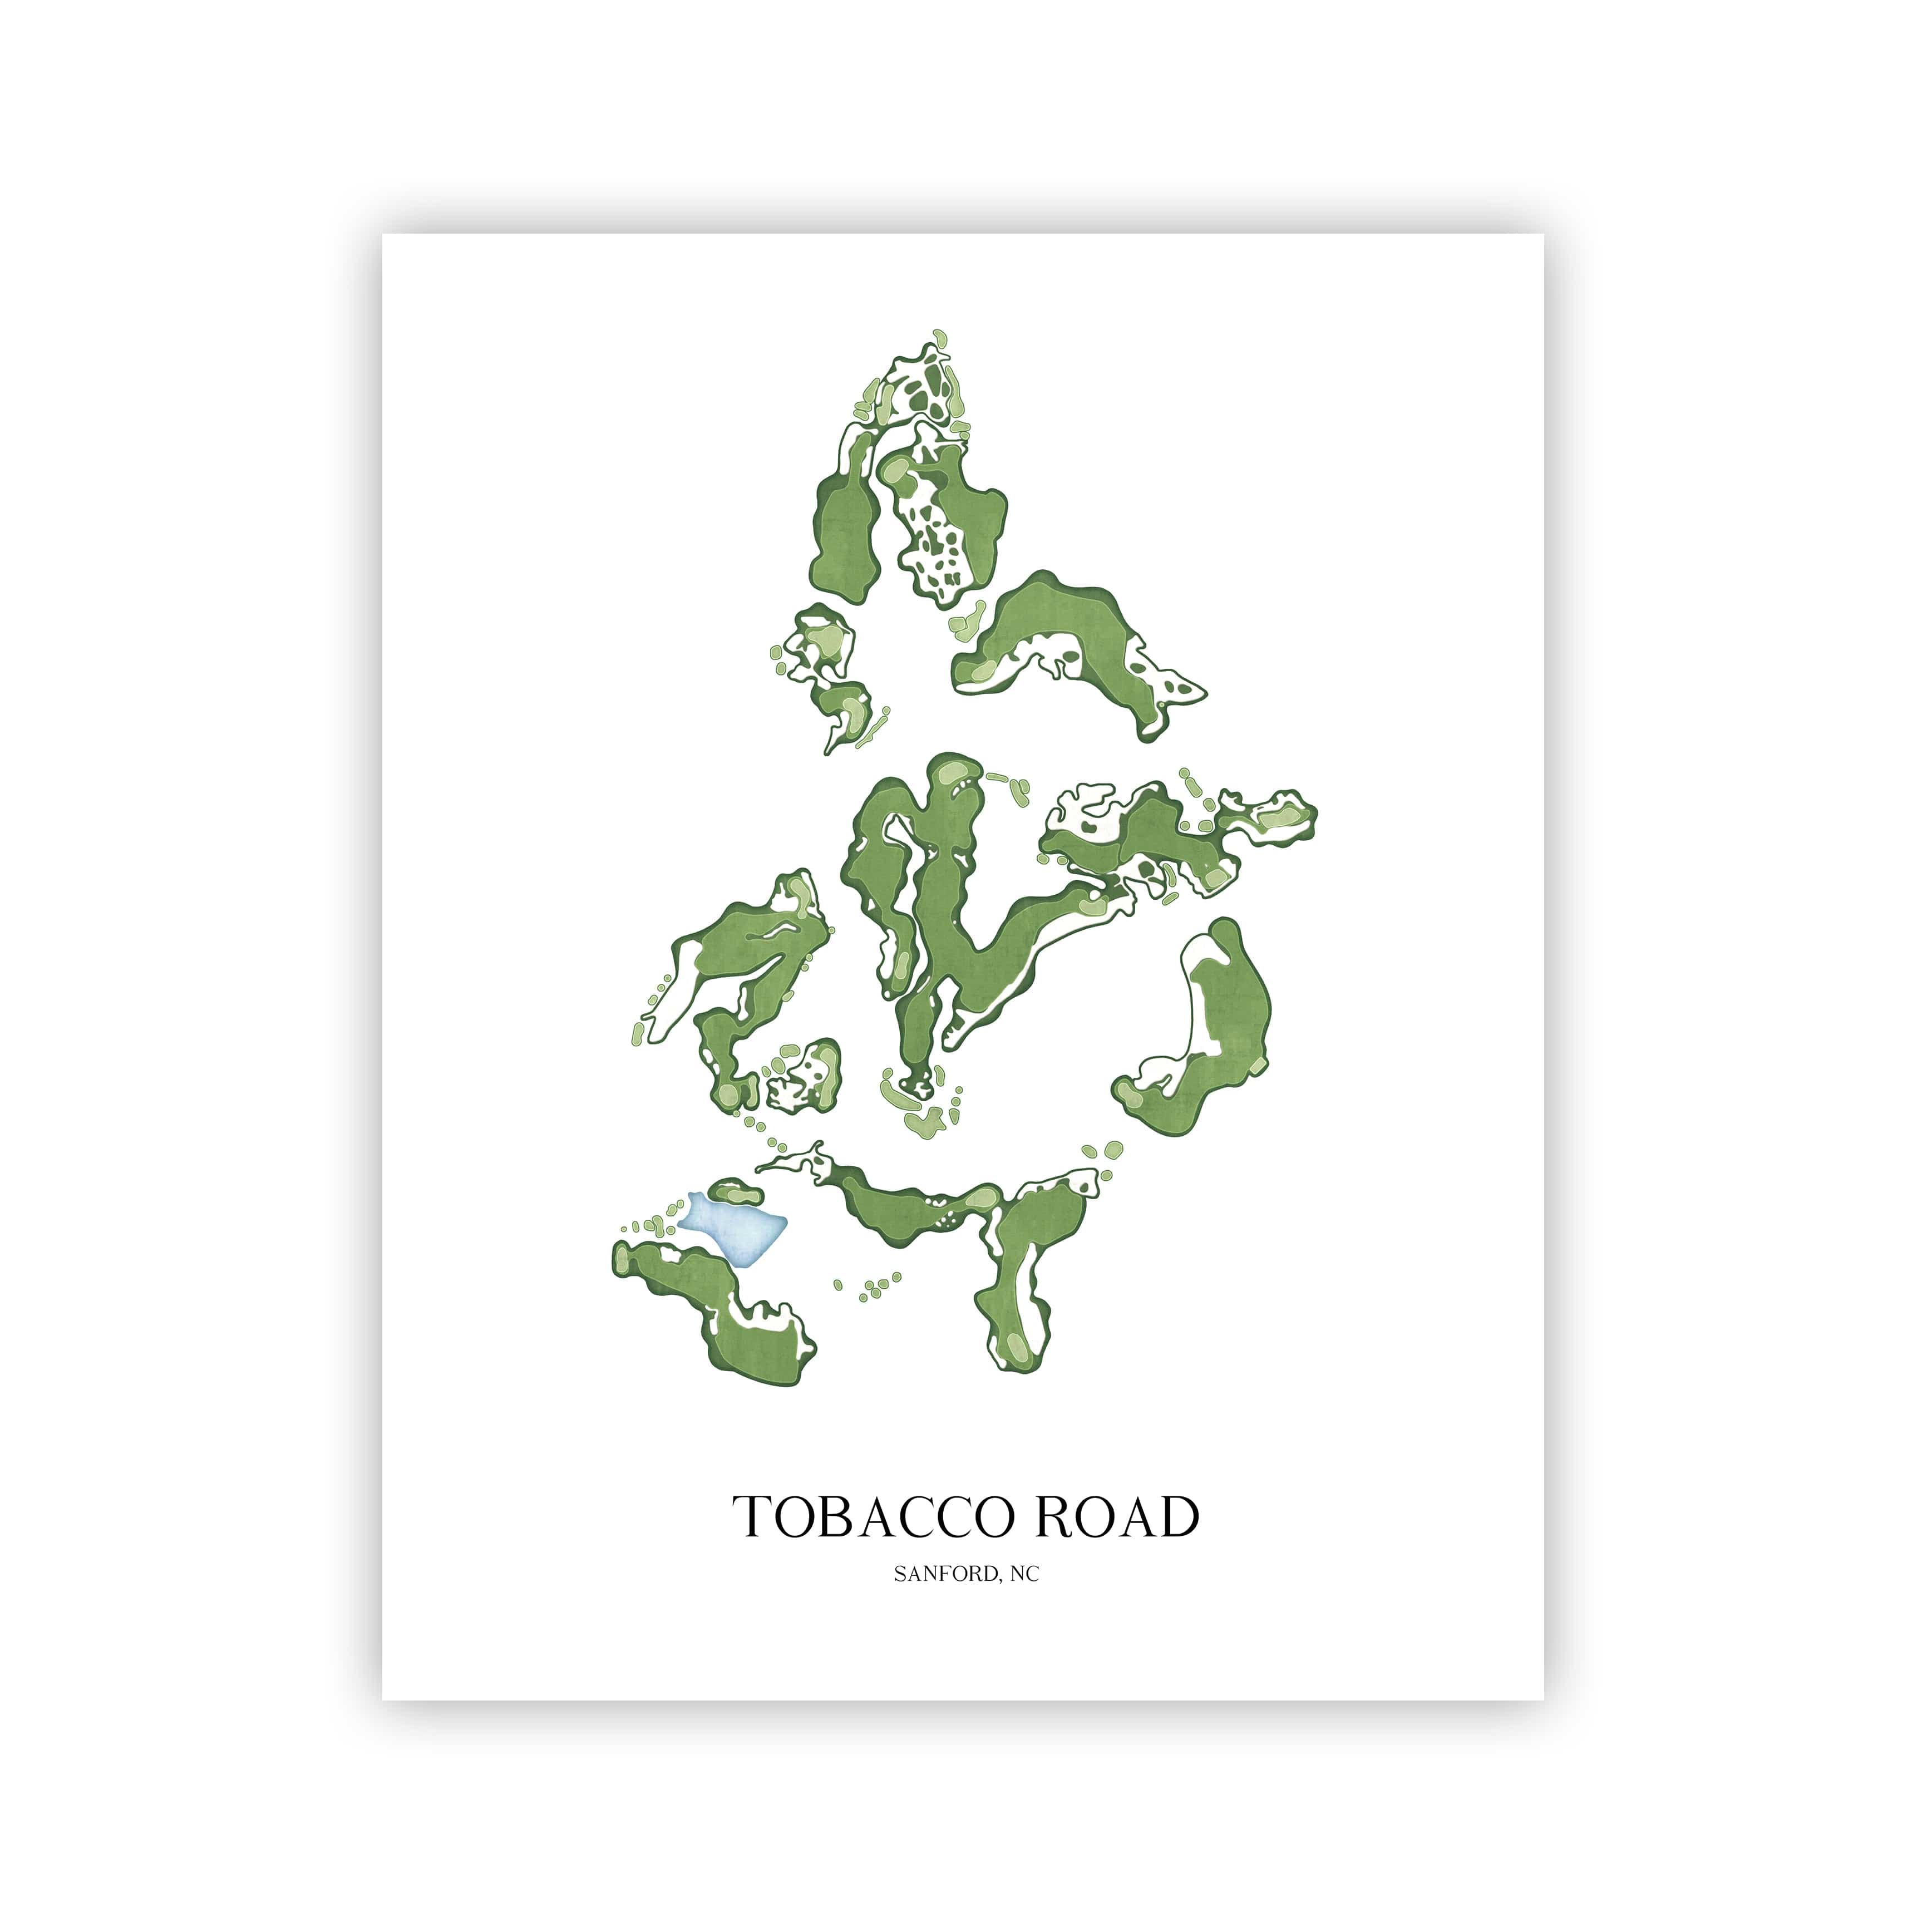 The 19th Hole Golf Shop - Golf Course Prints -  11" x 14" / No Frame Tobacco Road Golf Course Map